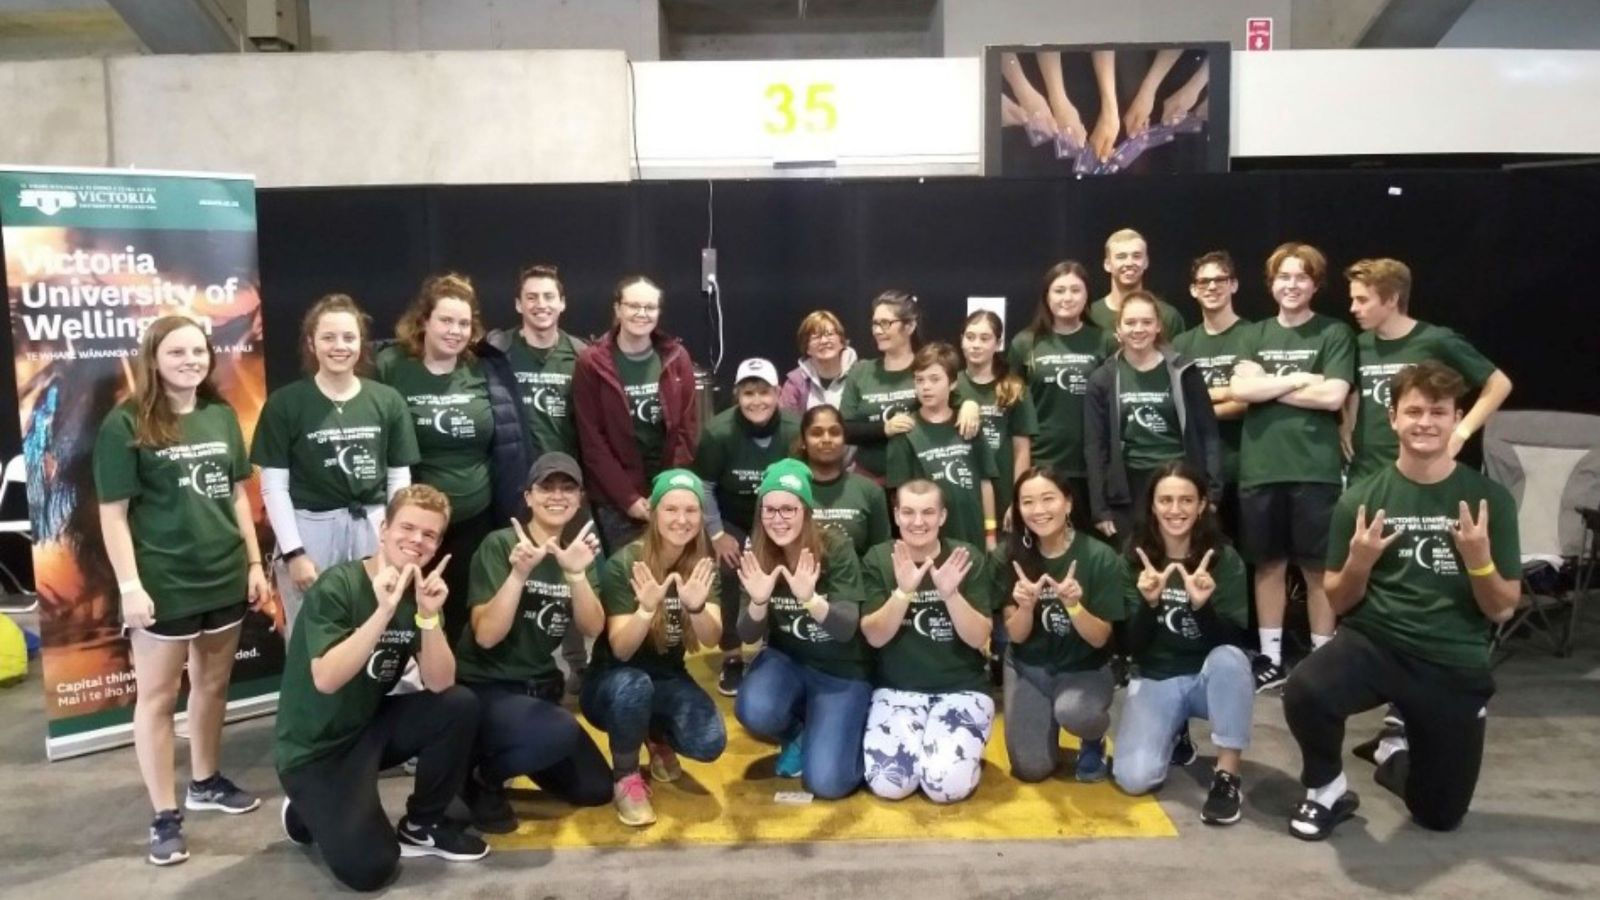 The University's 2019 Relay for Life team